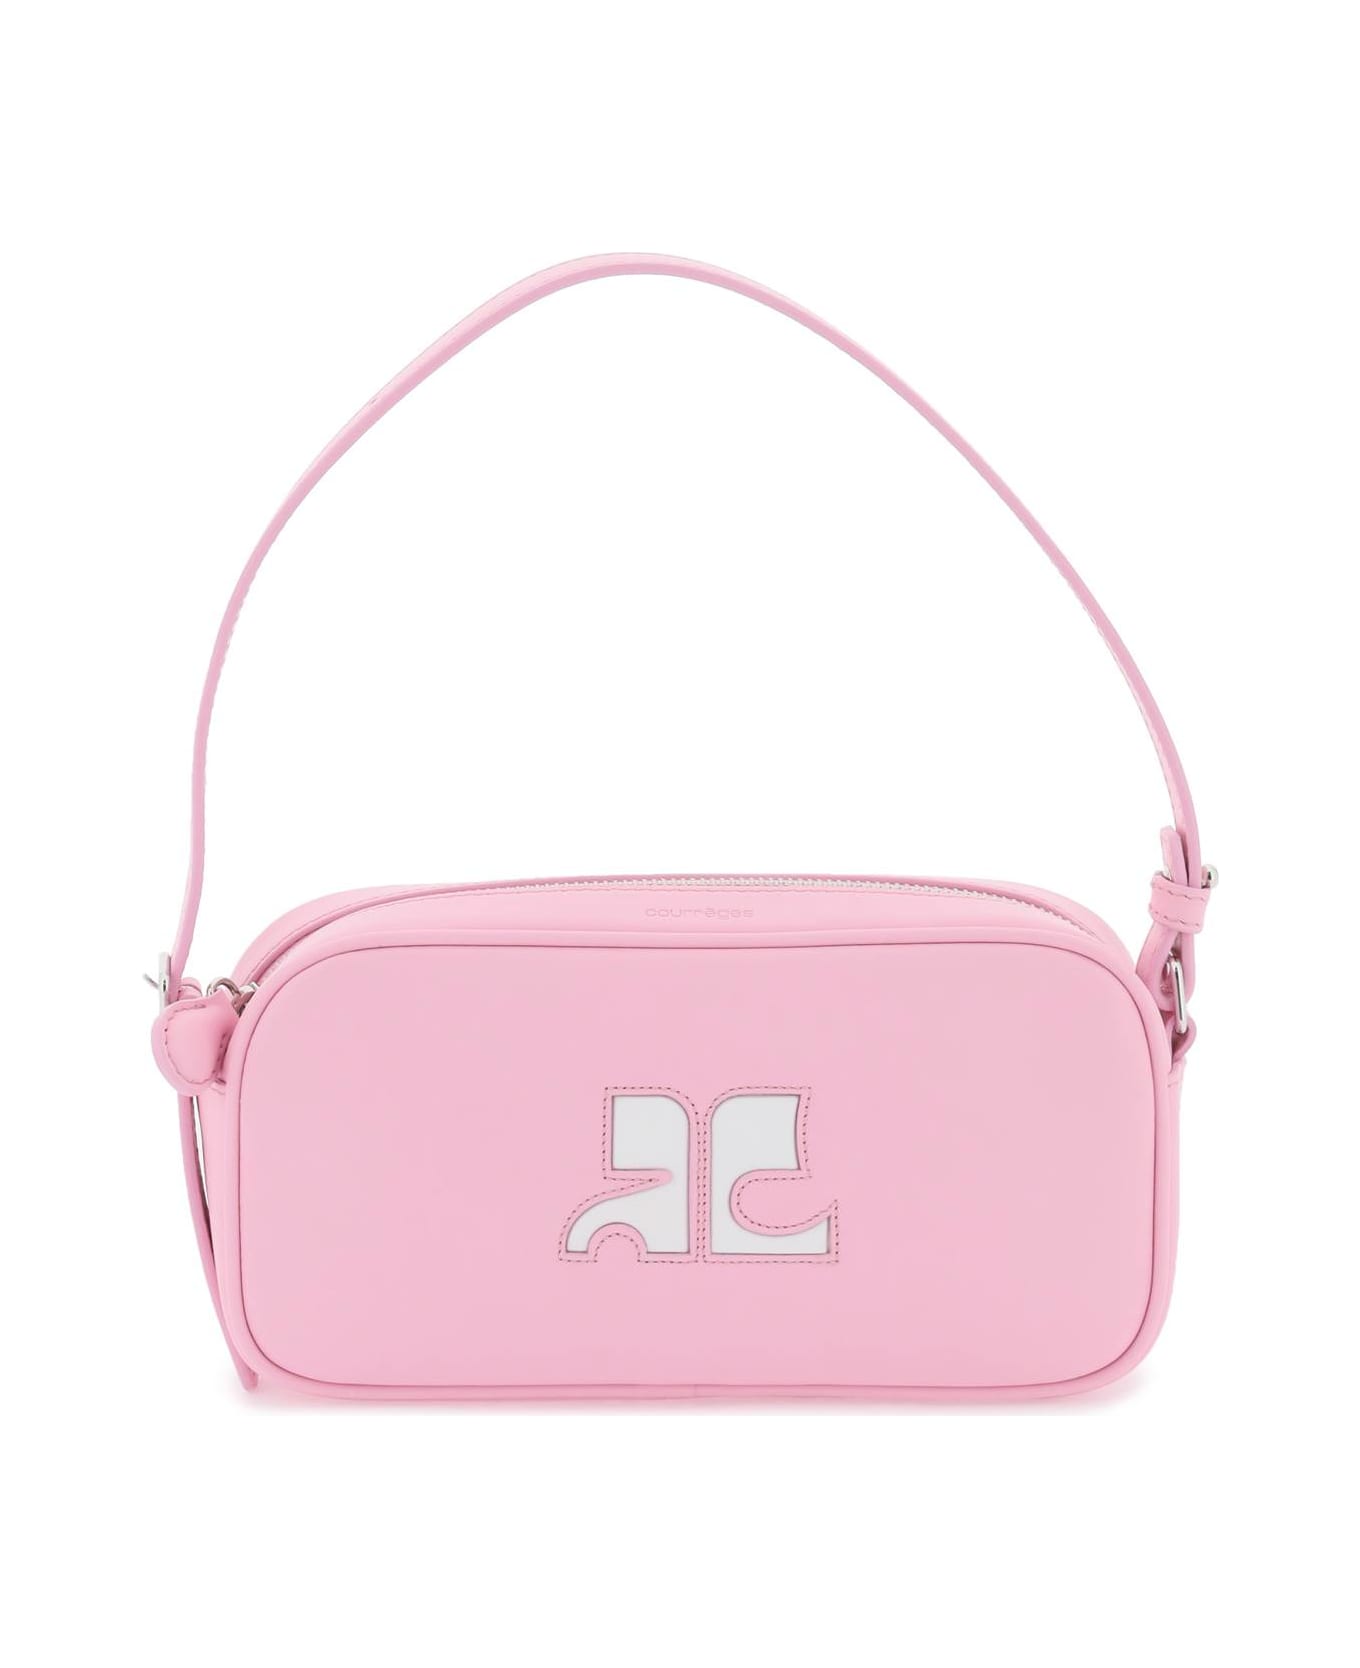 Courrèges Leather Baguette Bag - PINK ショルダーバッグ